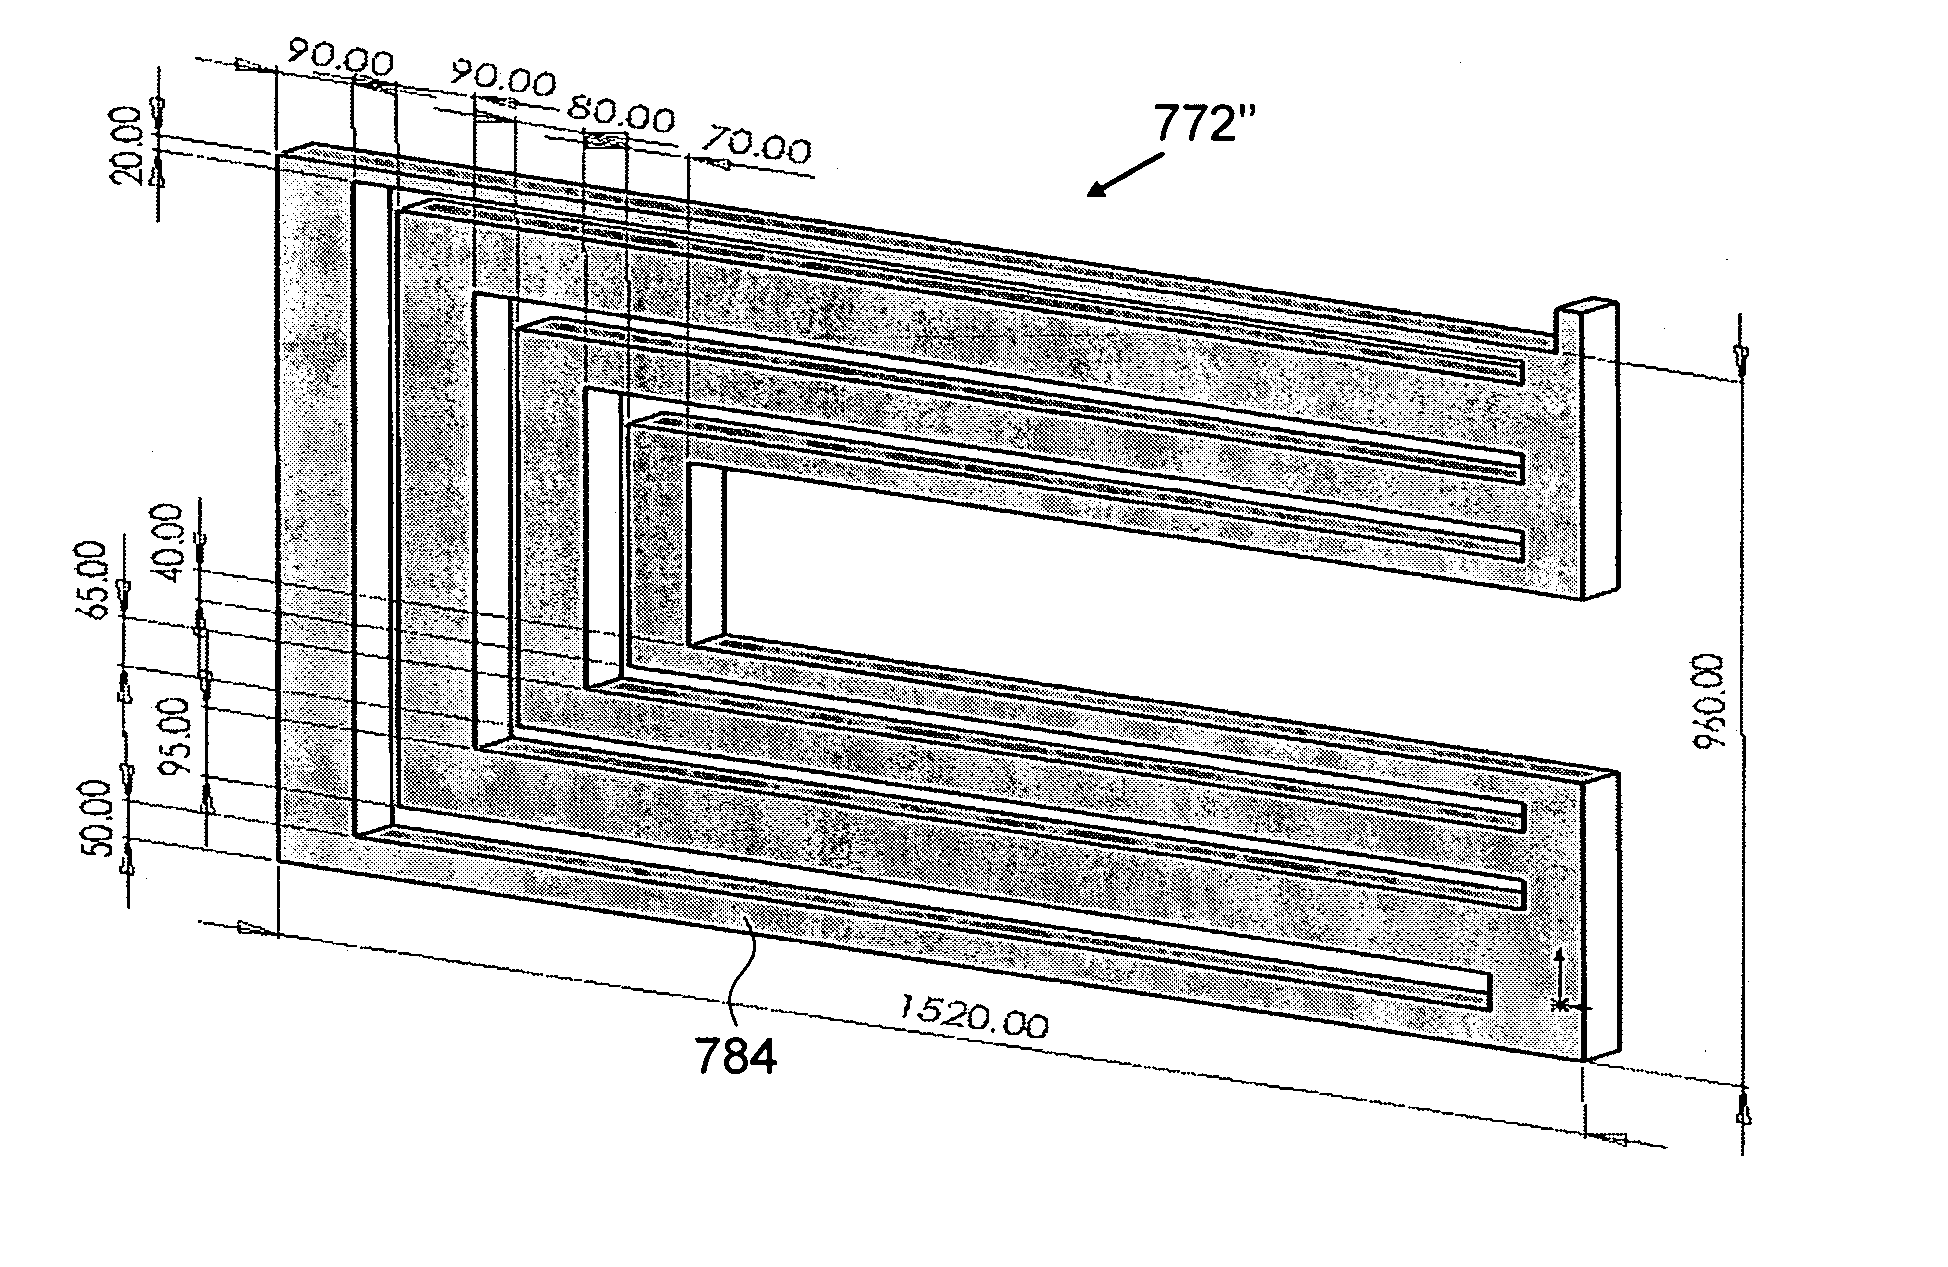 Cantilever microprobes for contacting electronic components and methods for making such probes